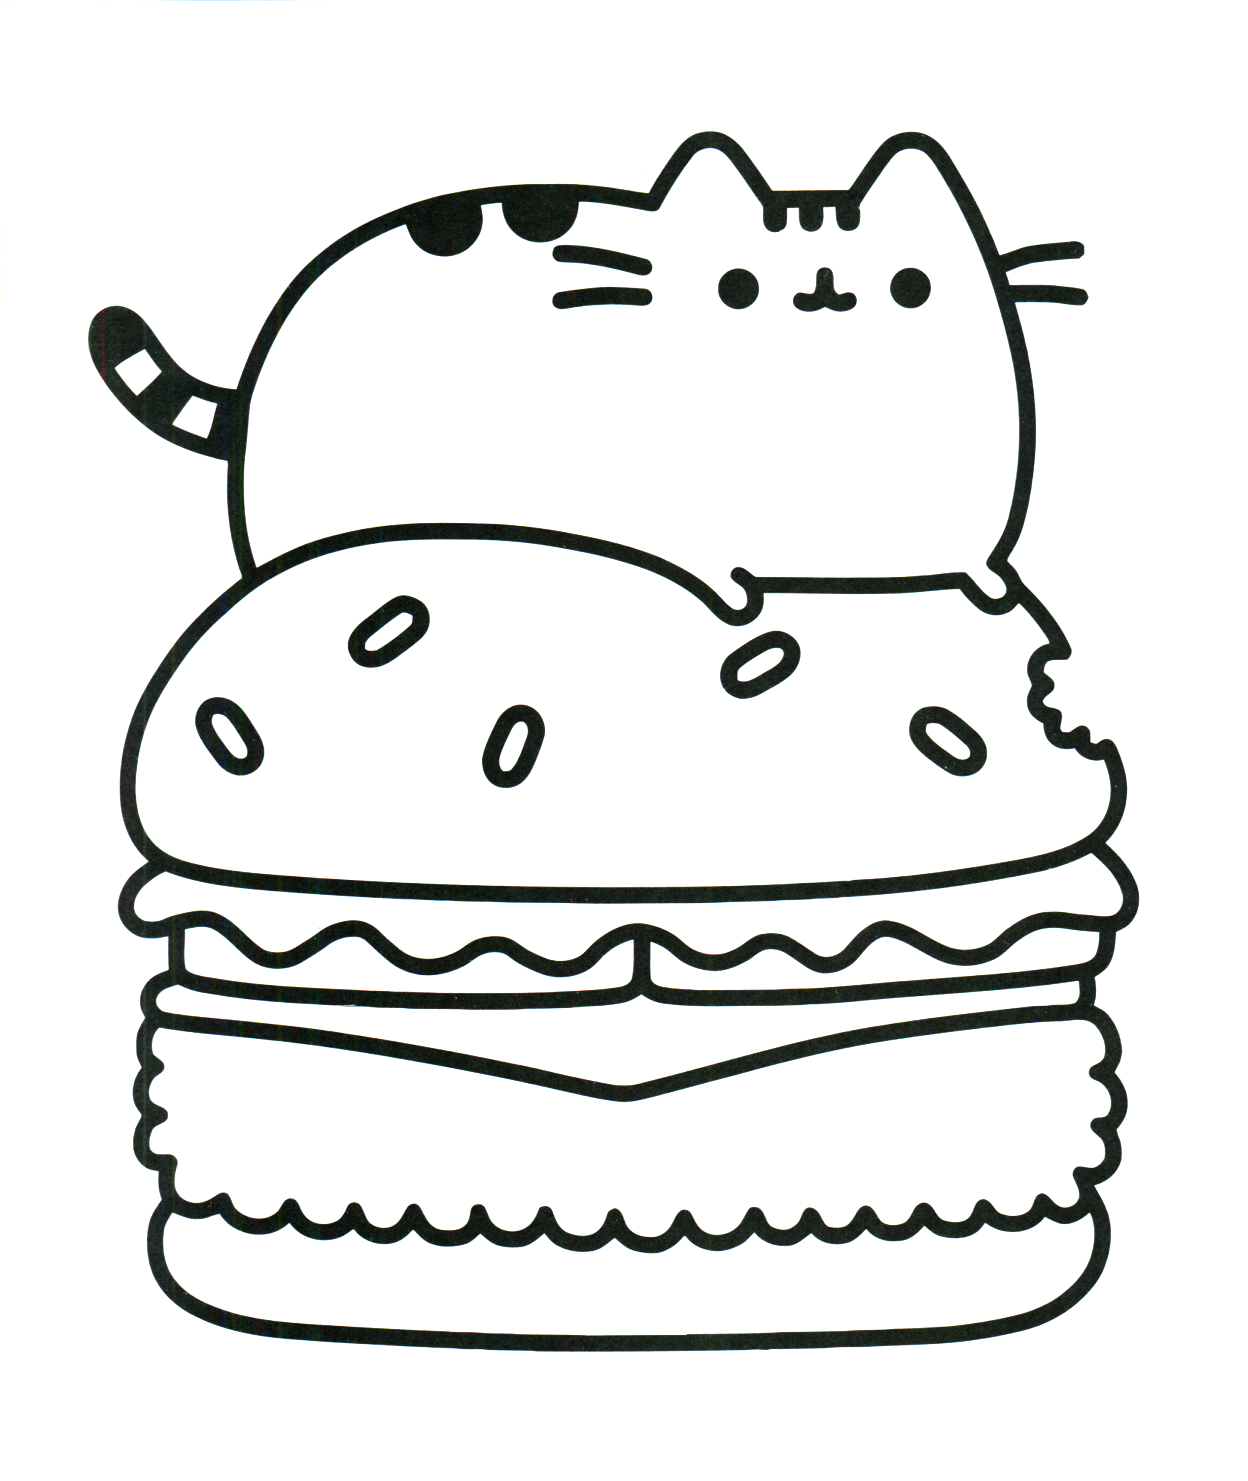 91 Top Kawaii Cats Coloring Pages Images & Pictures In HD